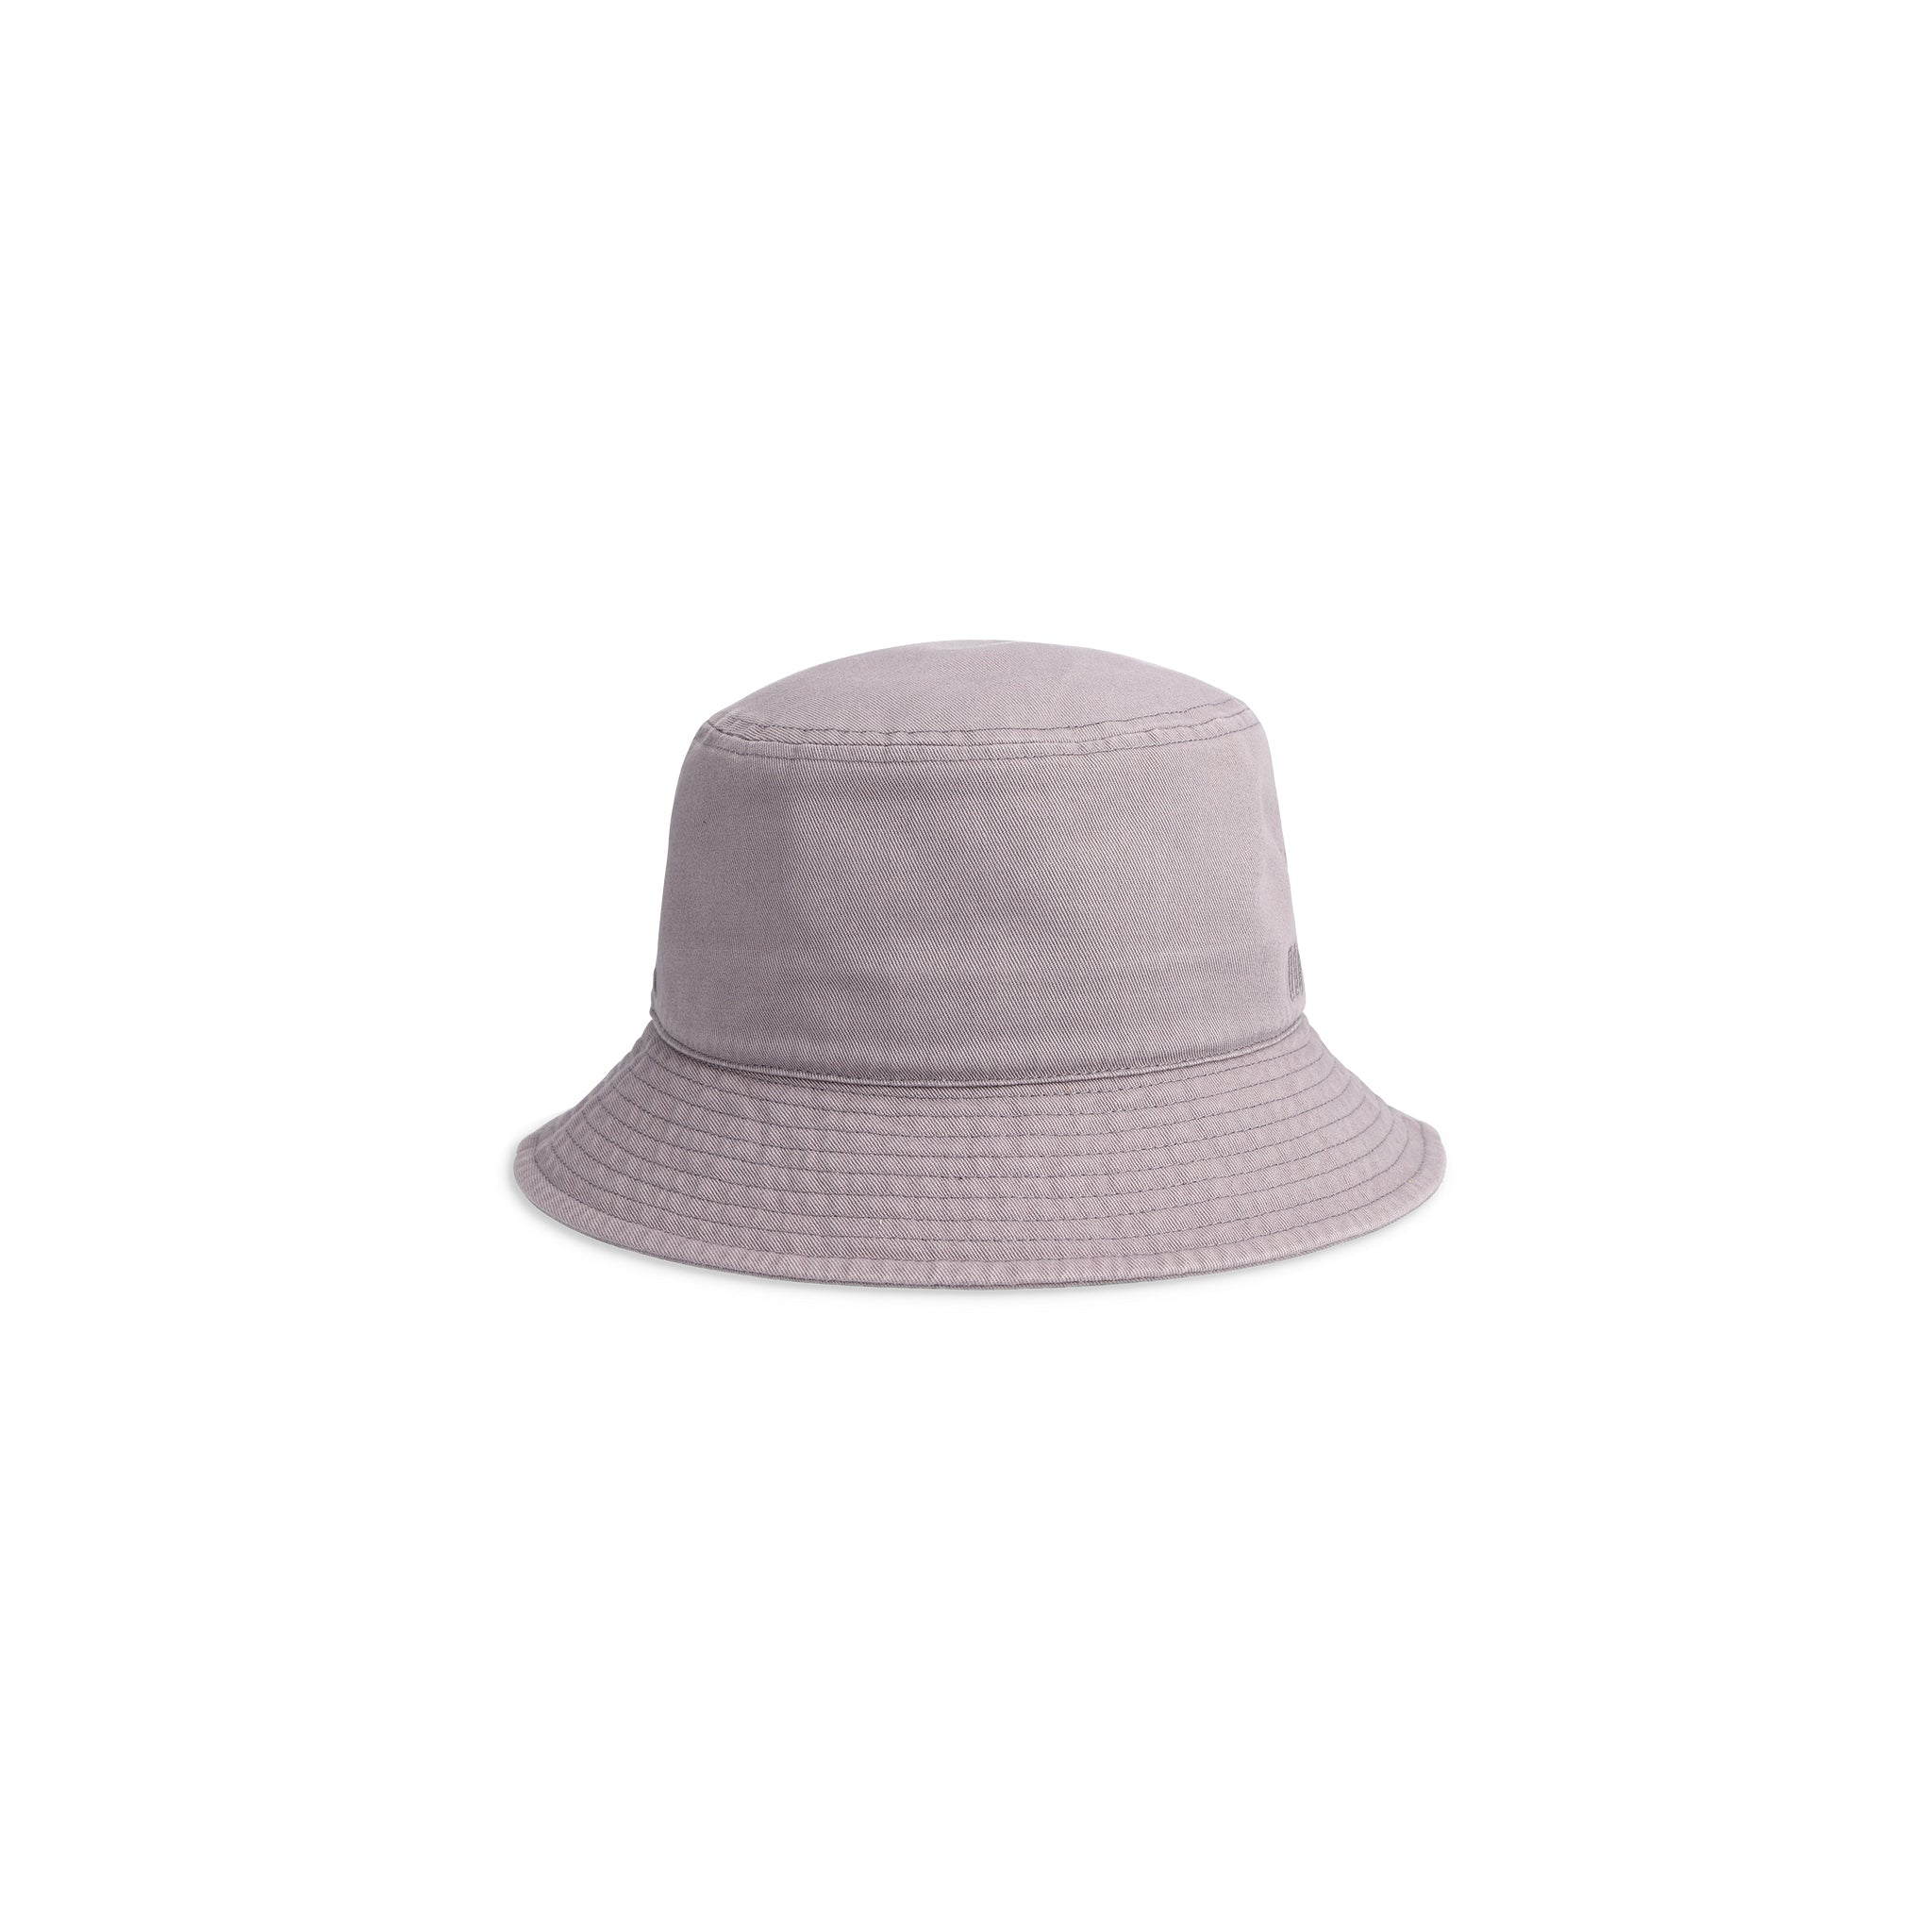 Back View of Topo Designs Dirt Bucket Hat in "Charcoal"